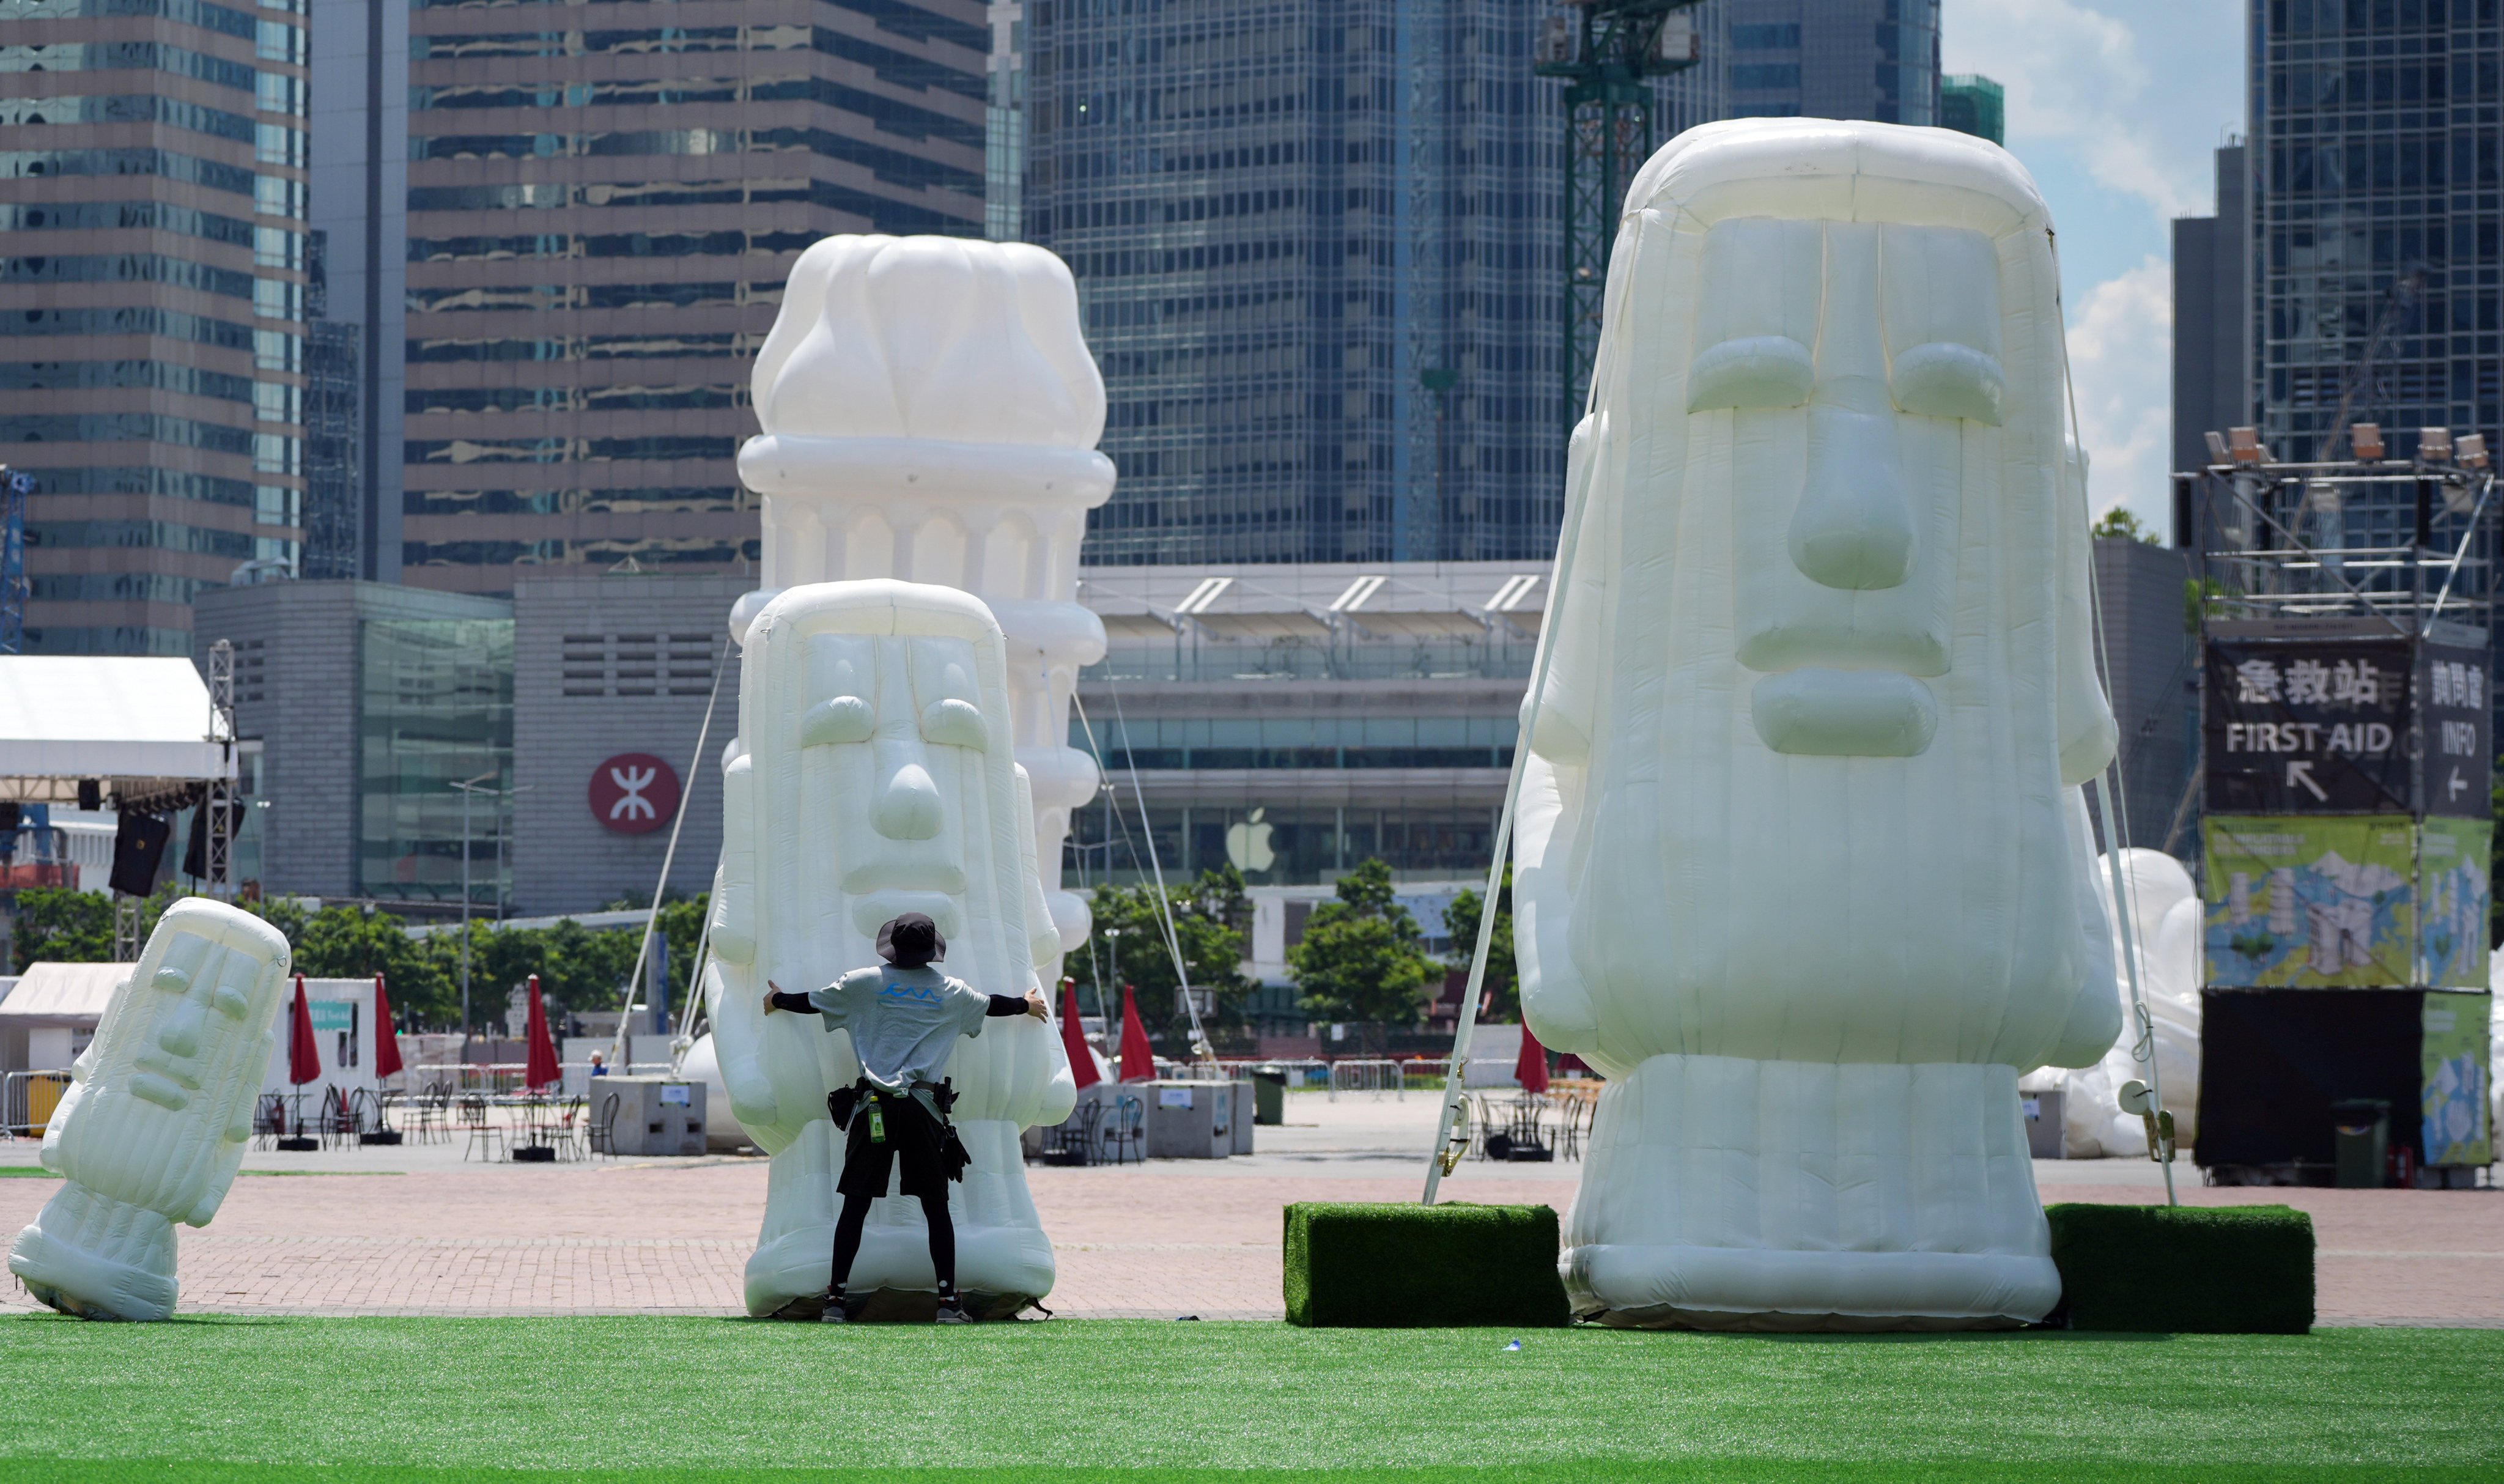 Workers inflate the “Inflatable Wonders” of SummerFest@Central in Central’s Harbourfront. Photo: Eugene Lee